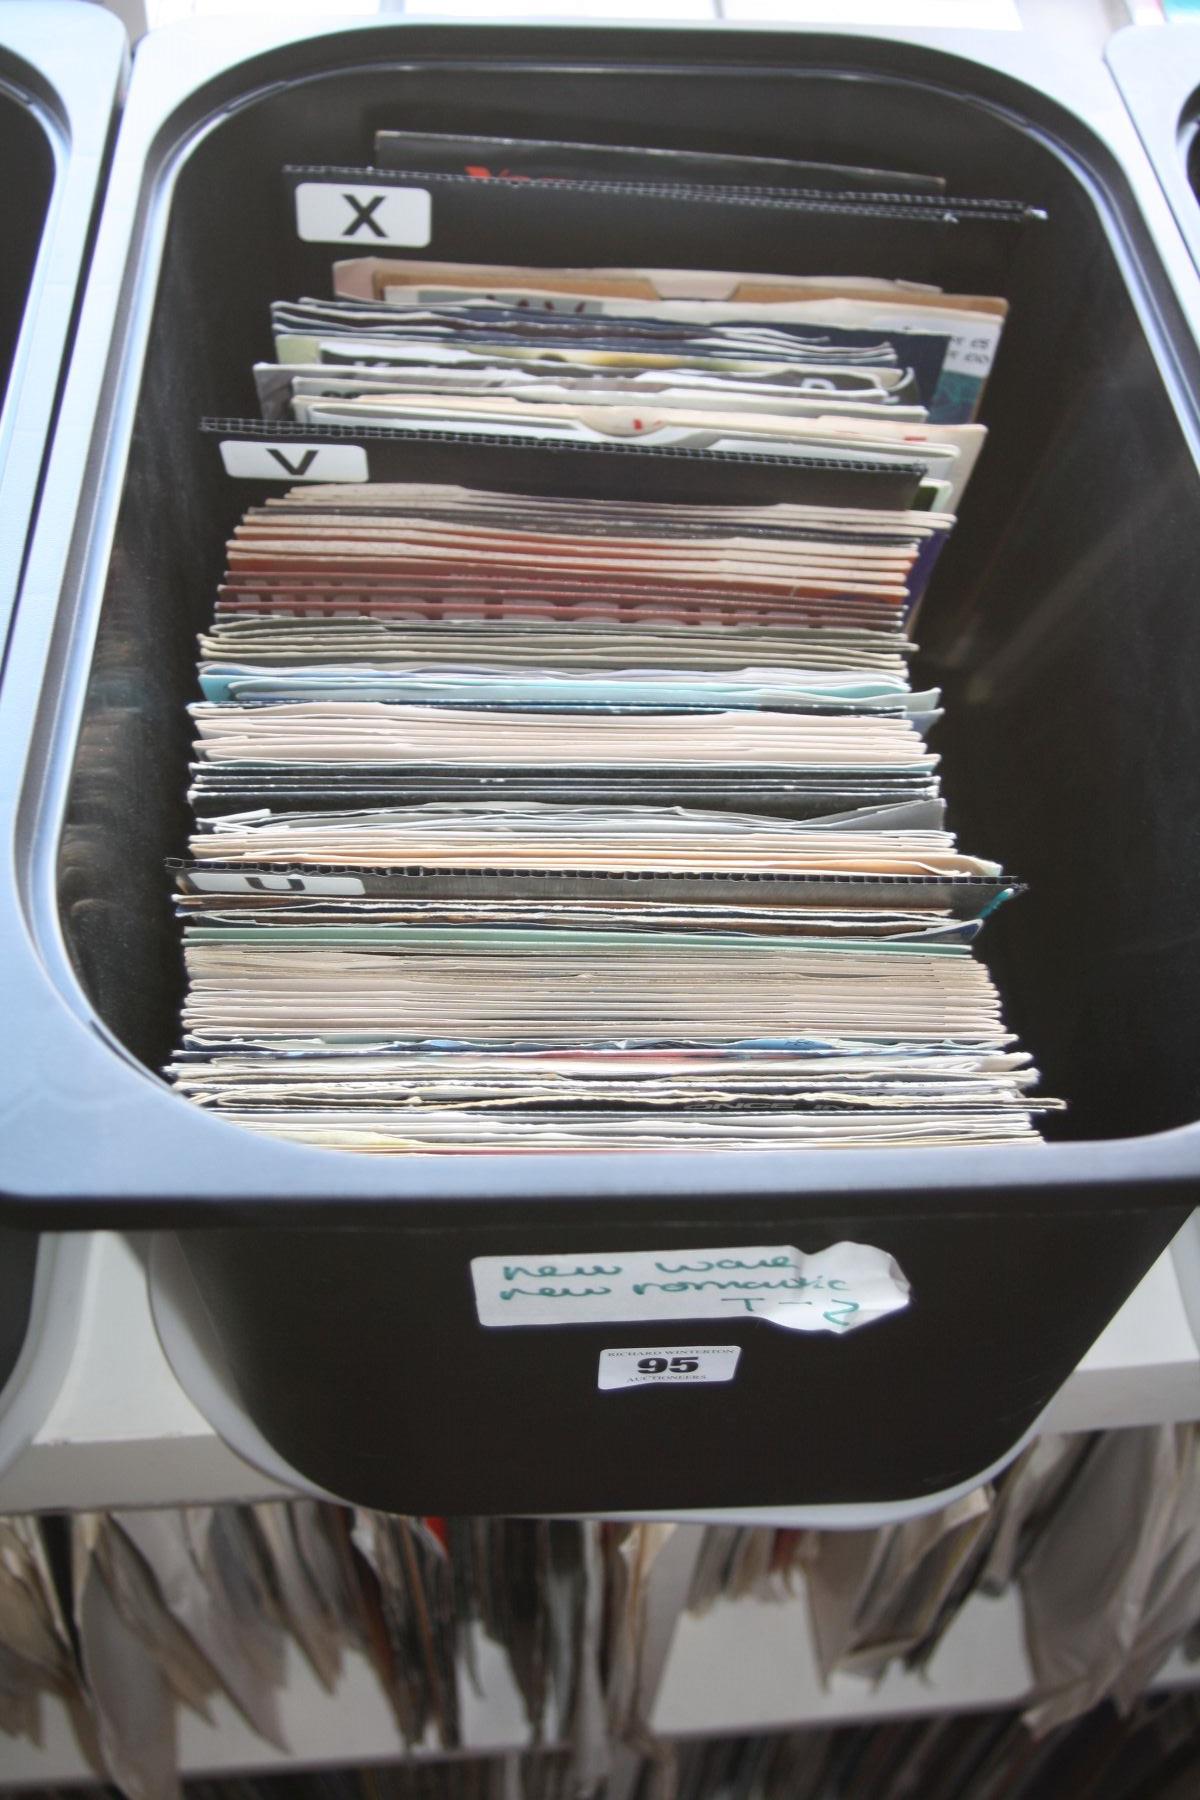 A TRAY CONTAINING OVER ONE HUNDRED AND TWENTY 7' SINGLES OF NEW WAVE, and New Romantic music